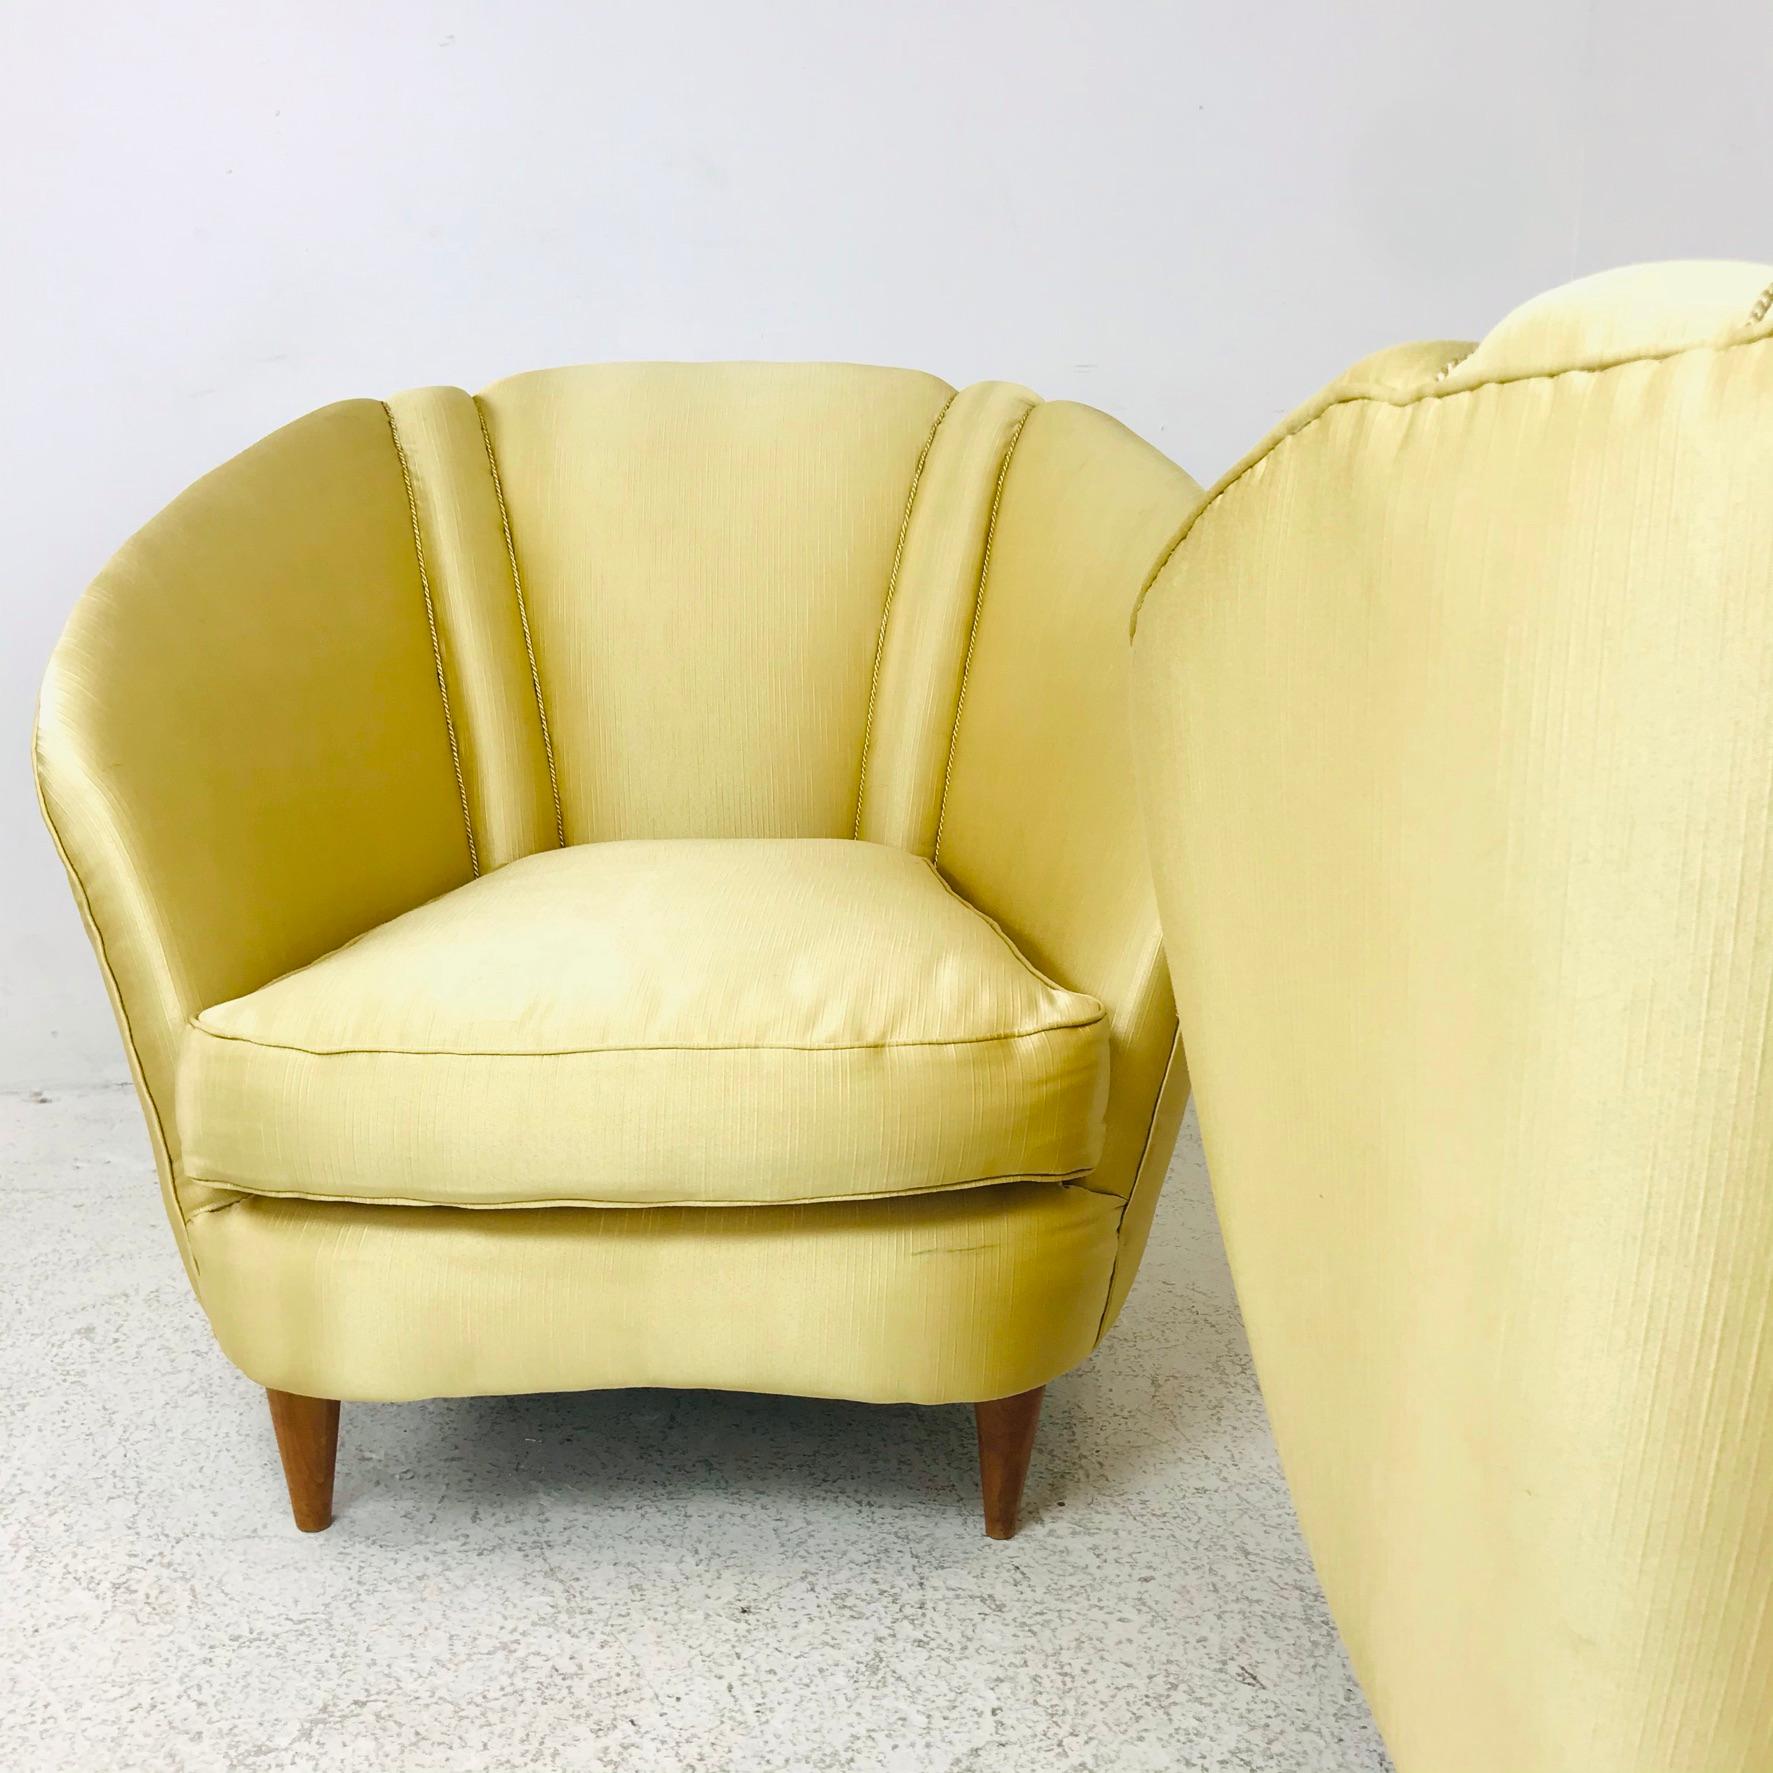 Mid-20th Century Pair of Midcentury Italian Lounge Chairs with Lotus Forms